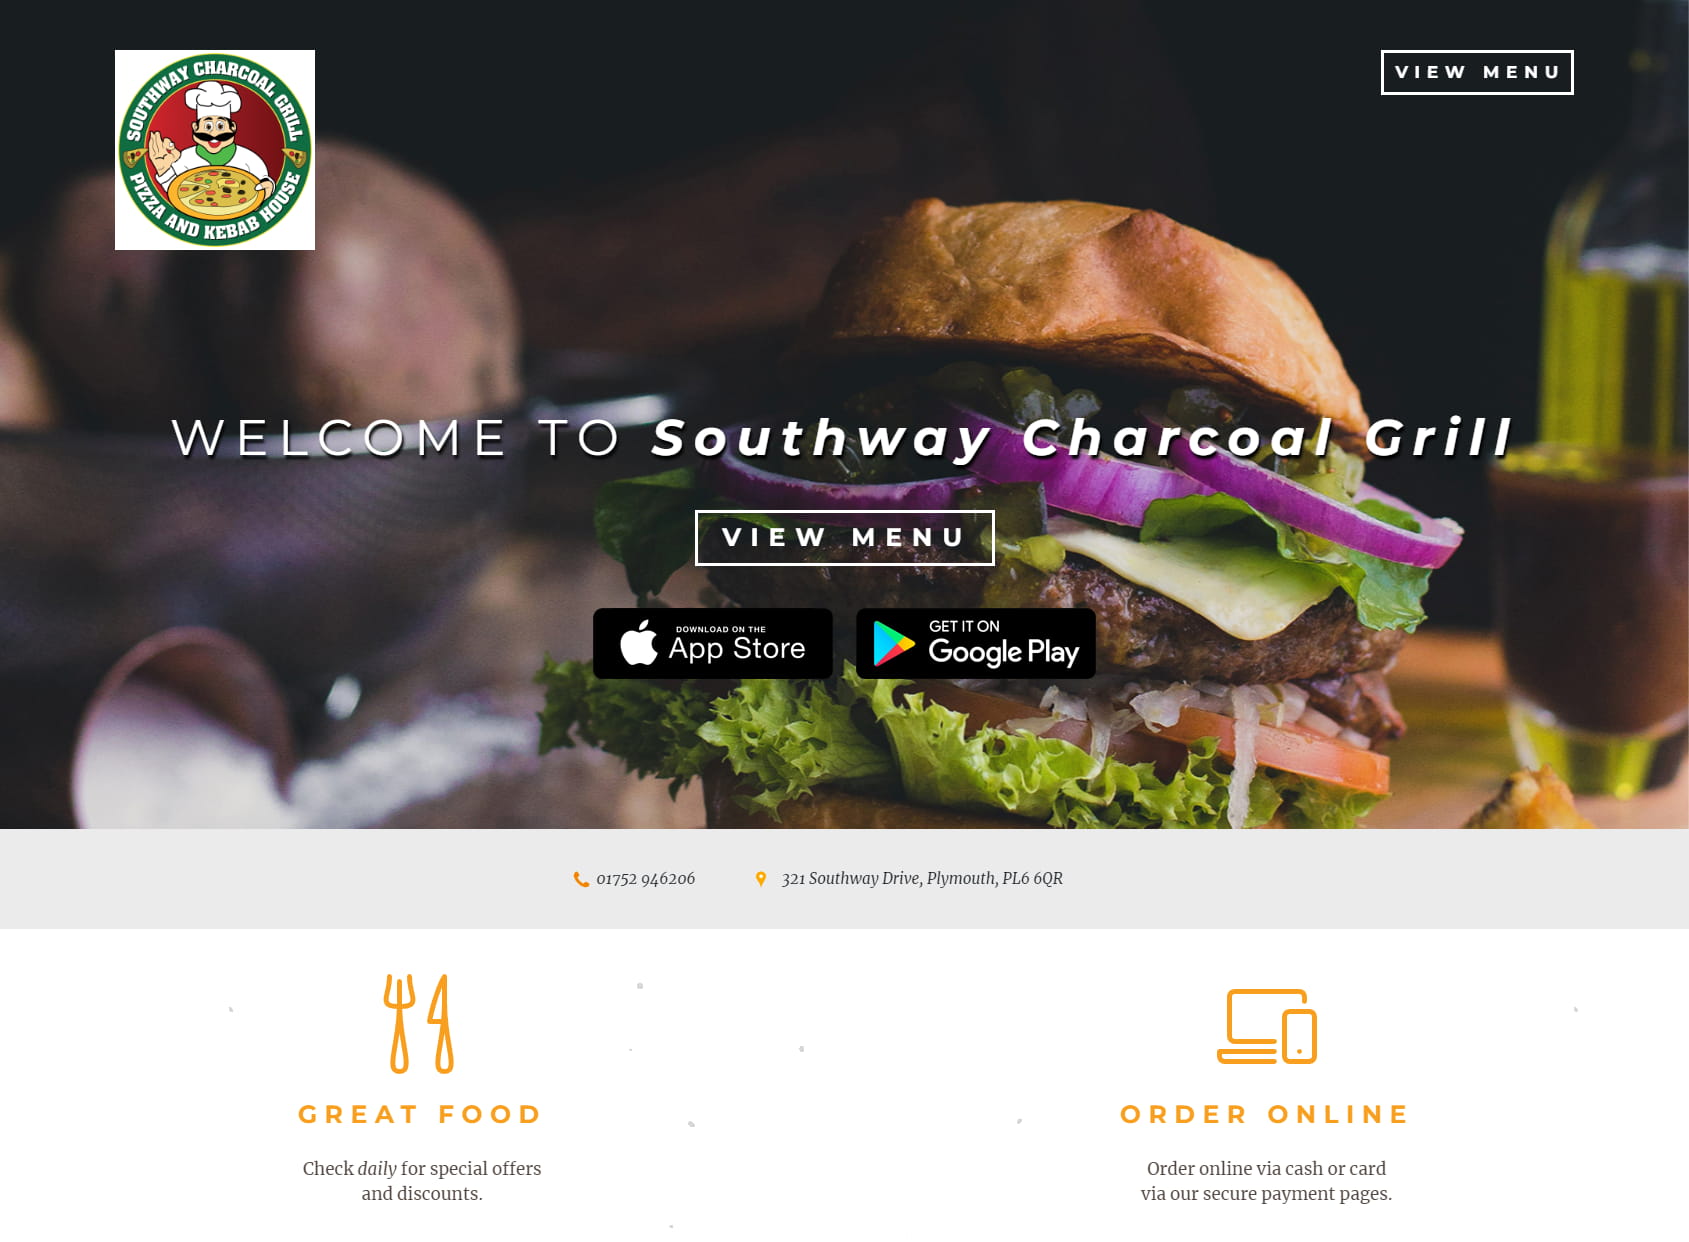 Southway Charcoal Grill